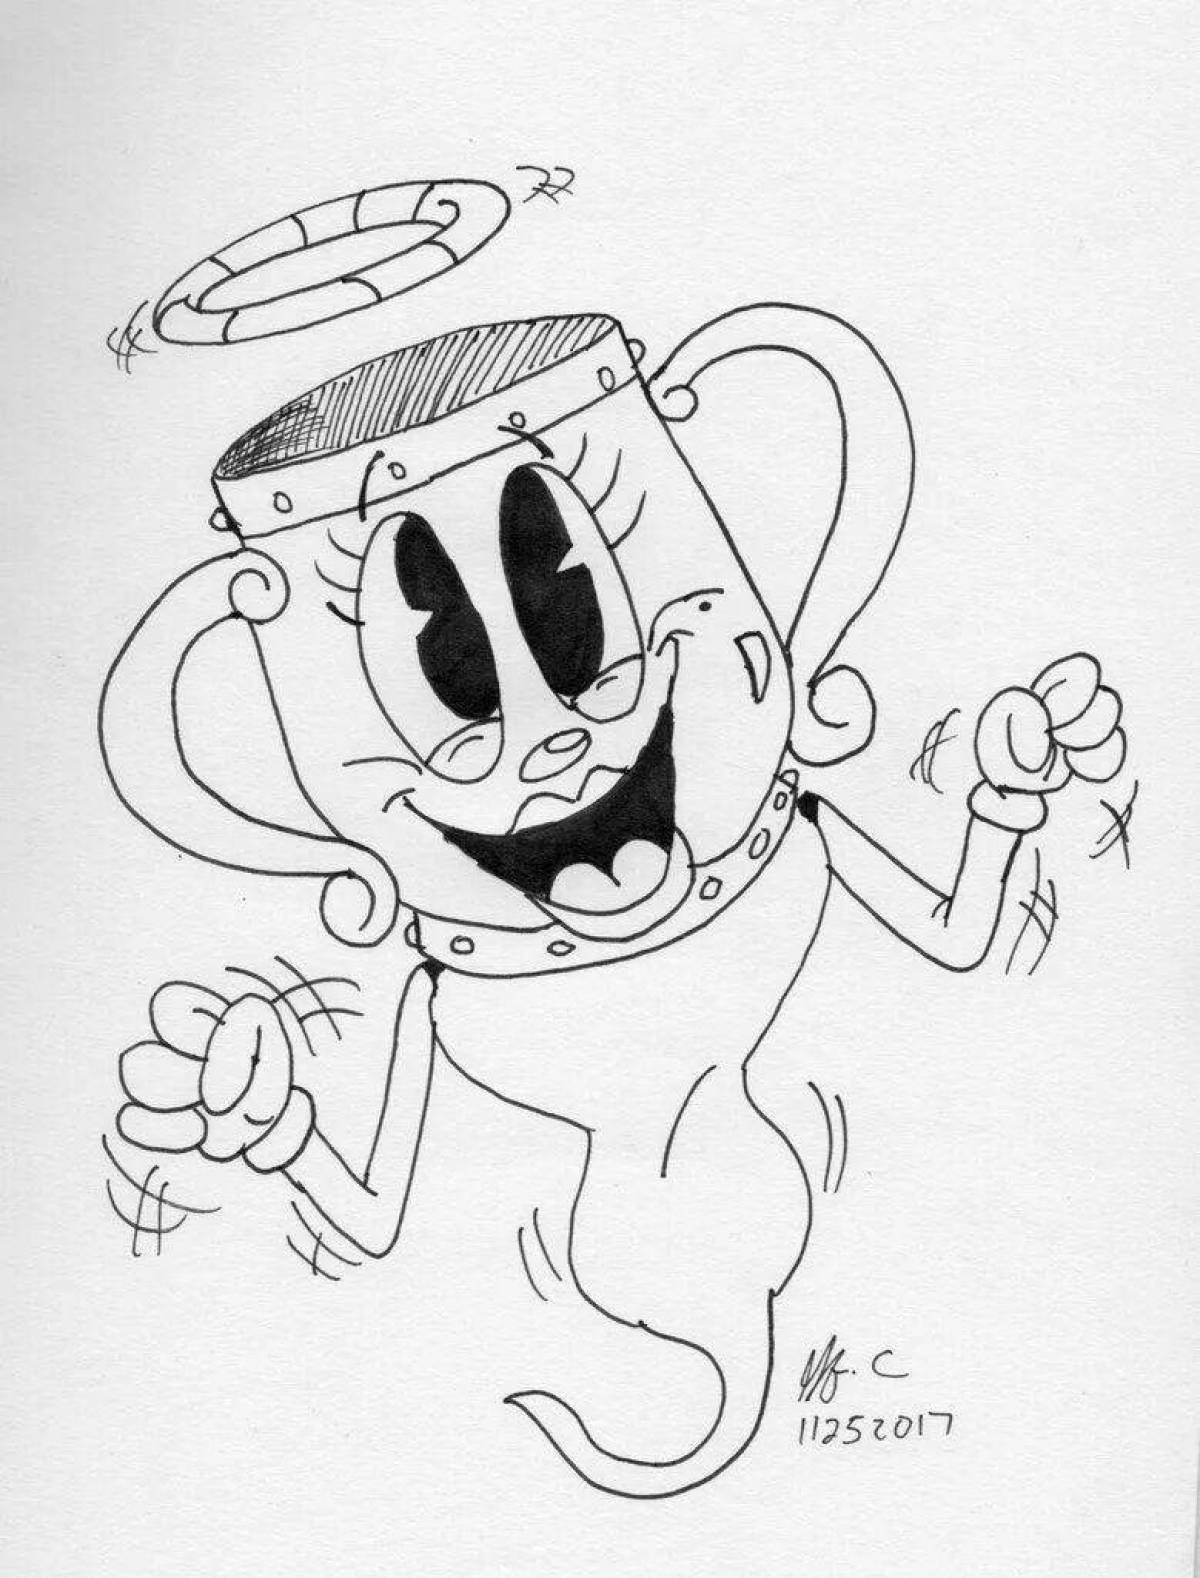 Cuphead charming bosses coloring book